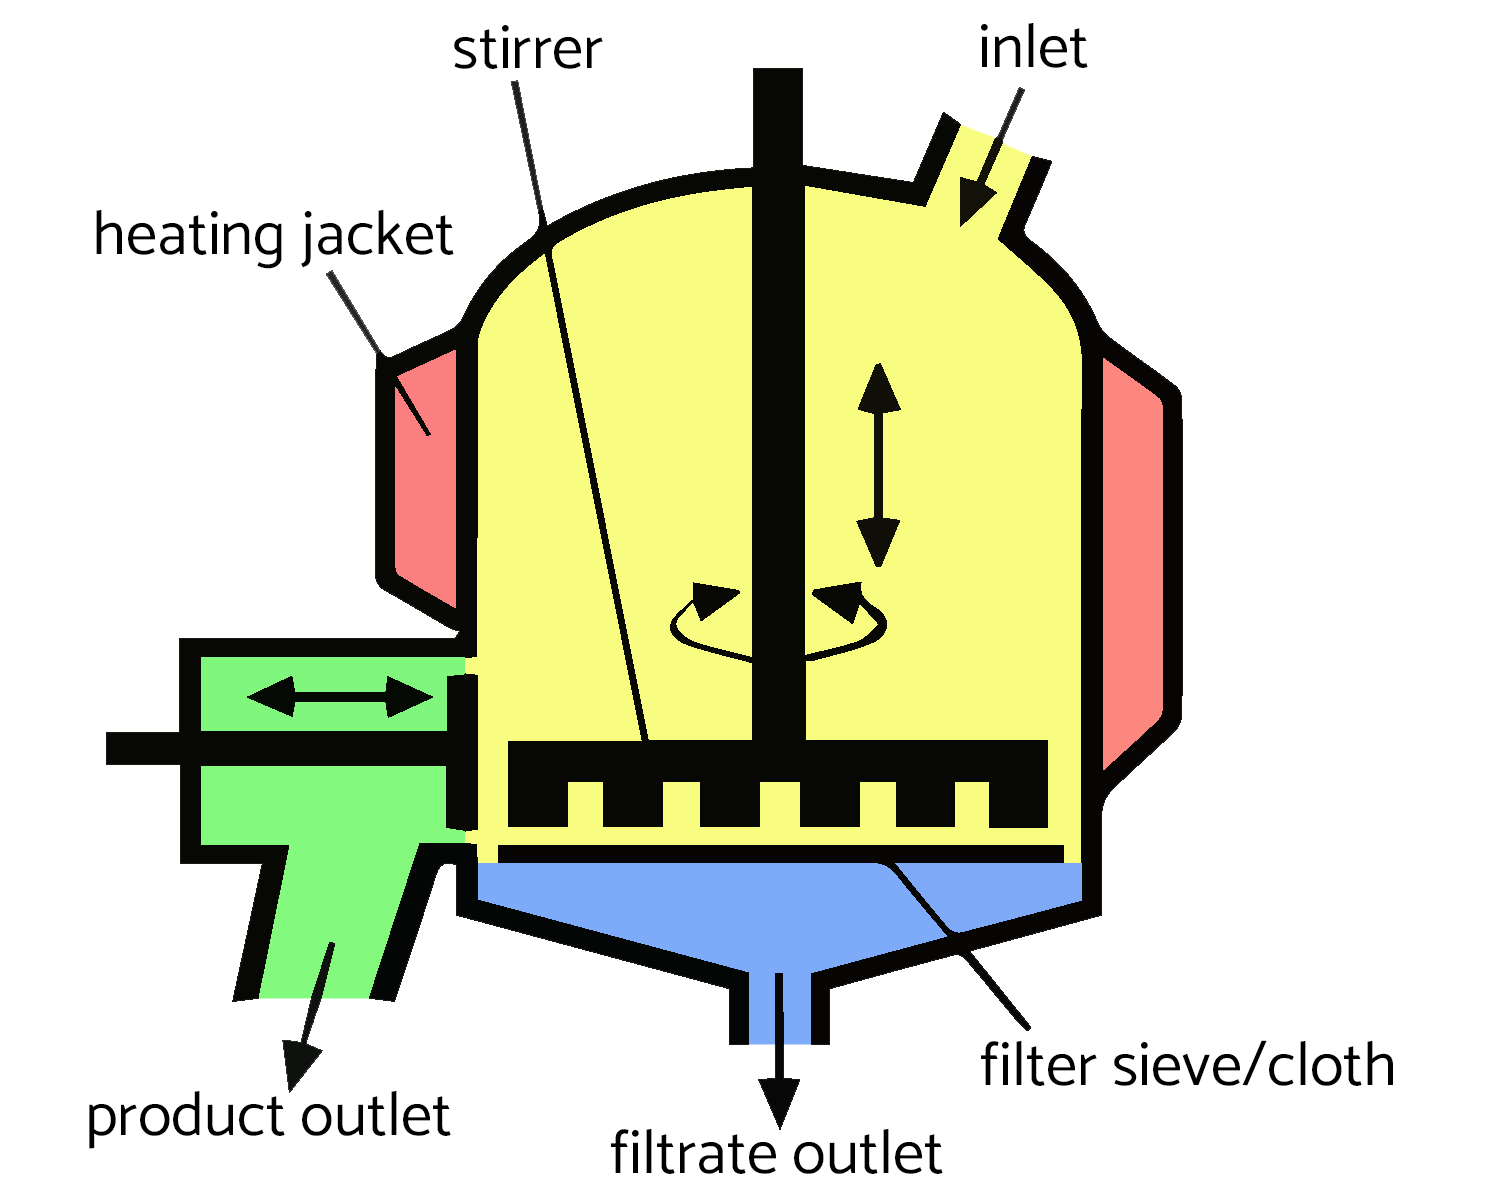 Principle schematic picture of the Agitated Nutsche Filter Dryer